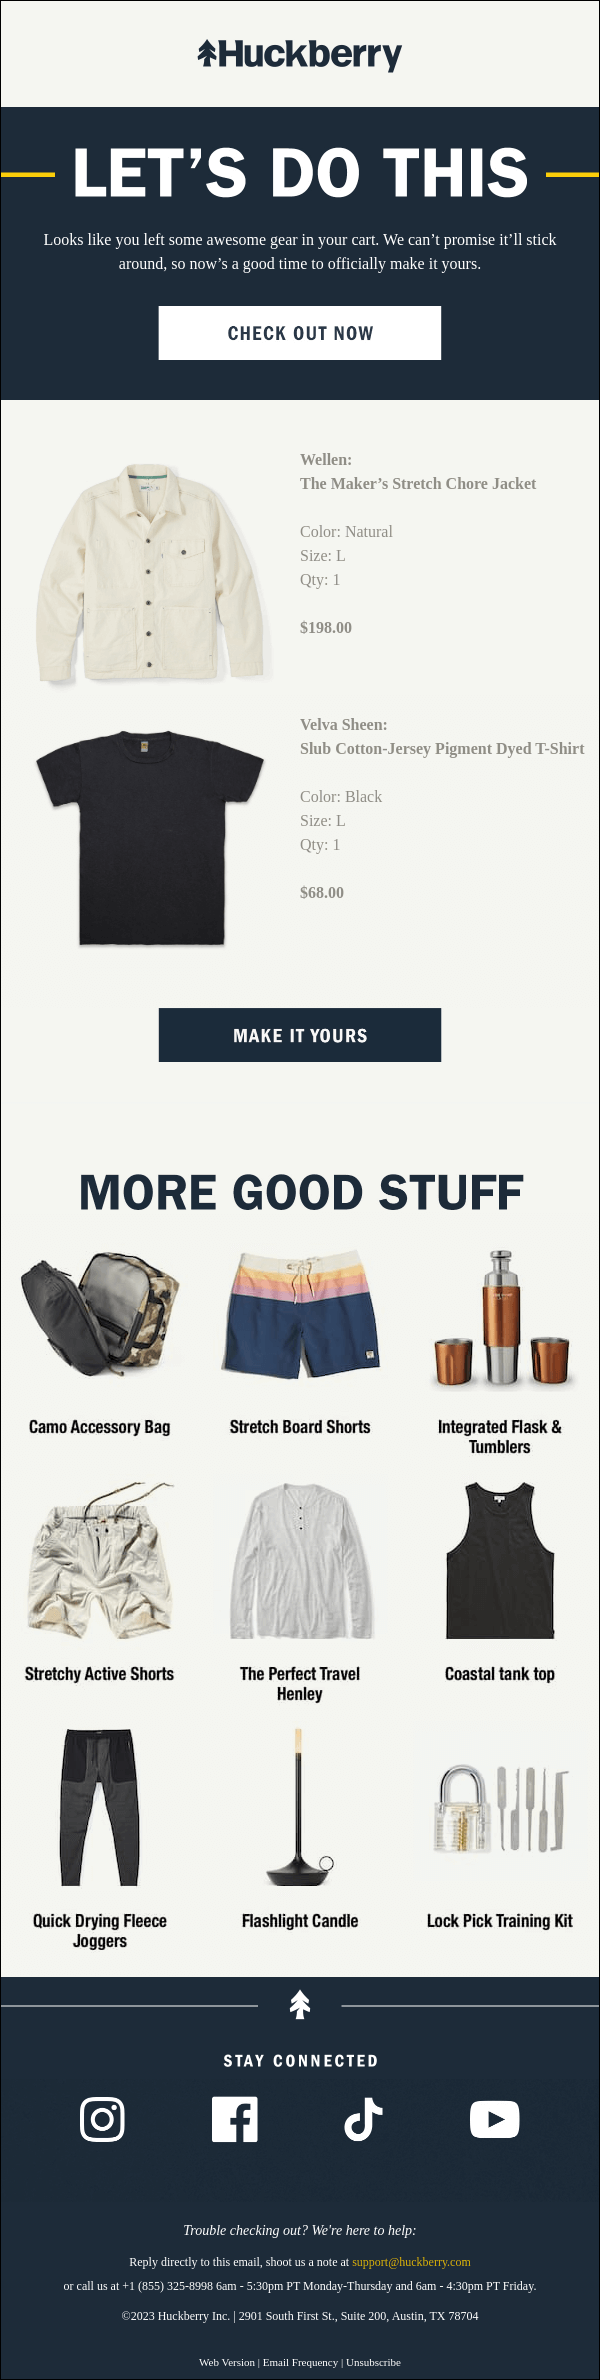 Amazing Outfits  Email design inspiration, Email marketing layout